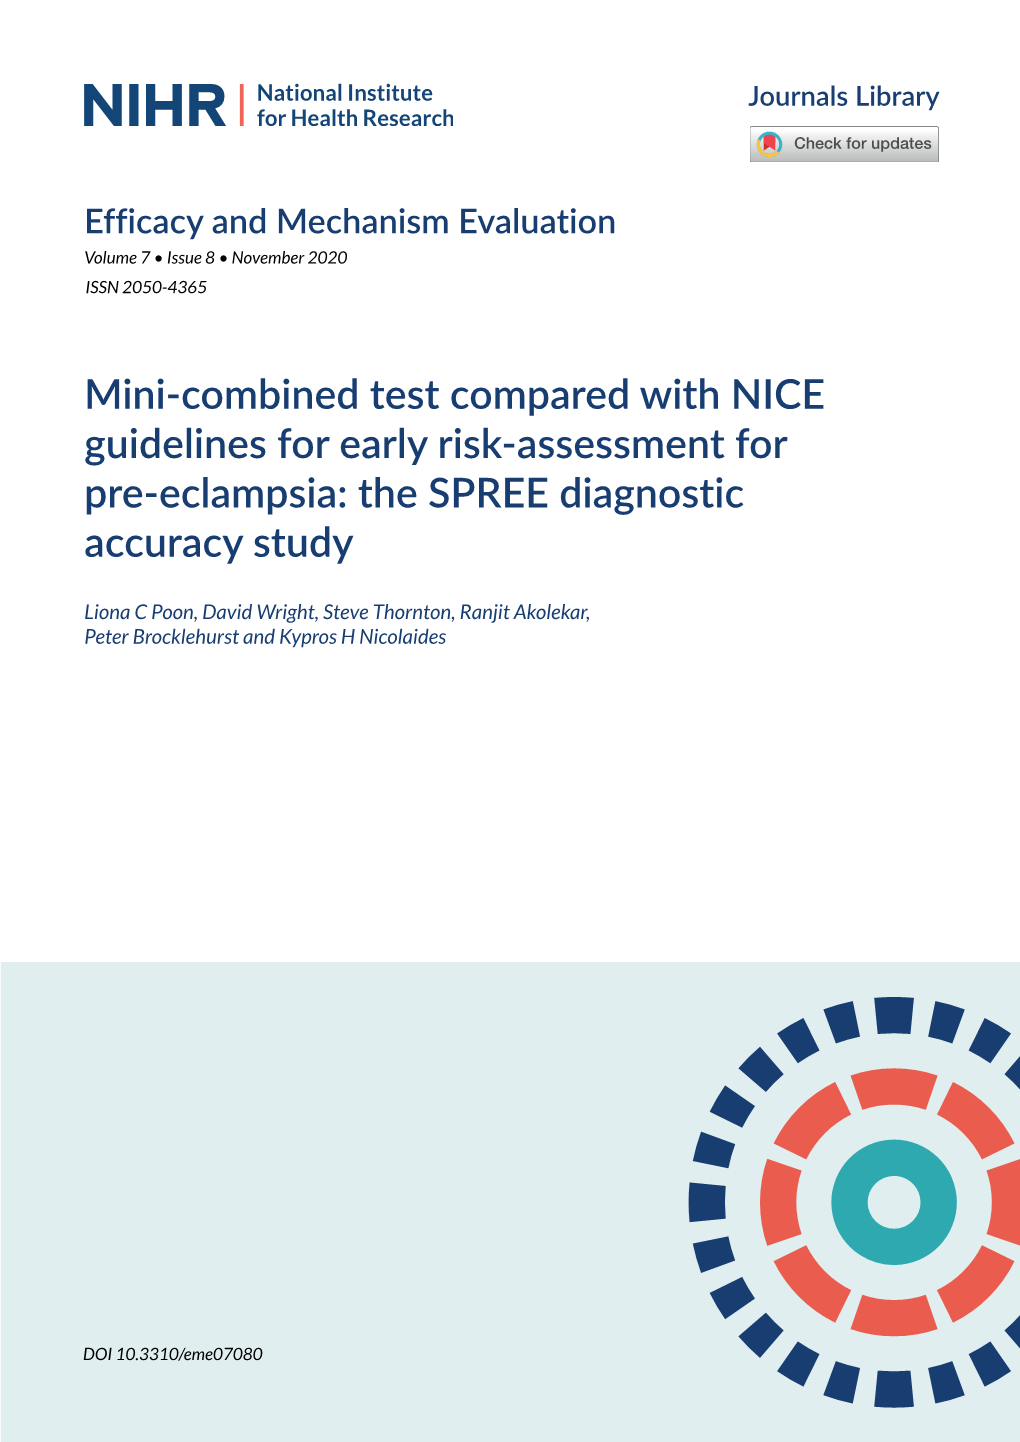 Mini-Combined Test Compared with NICE Guidelines for Early Risk-Assessment for Pre-Eclampsia: the SPREE Diagnostic Accuracy Study